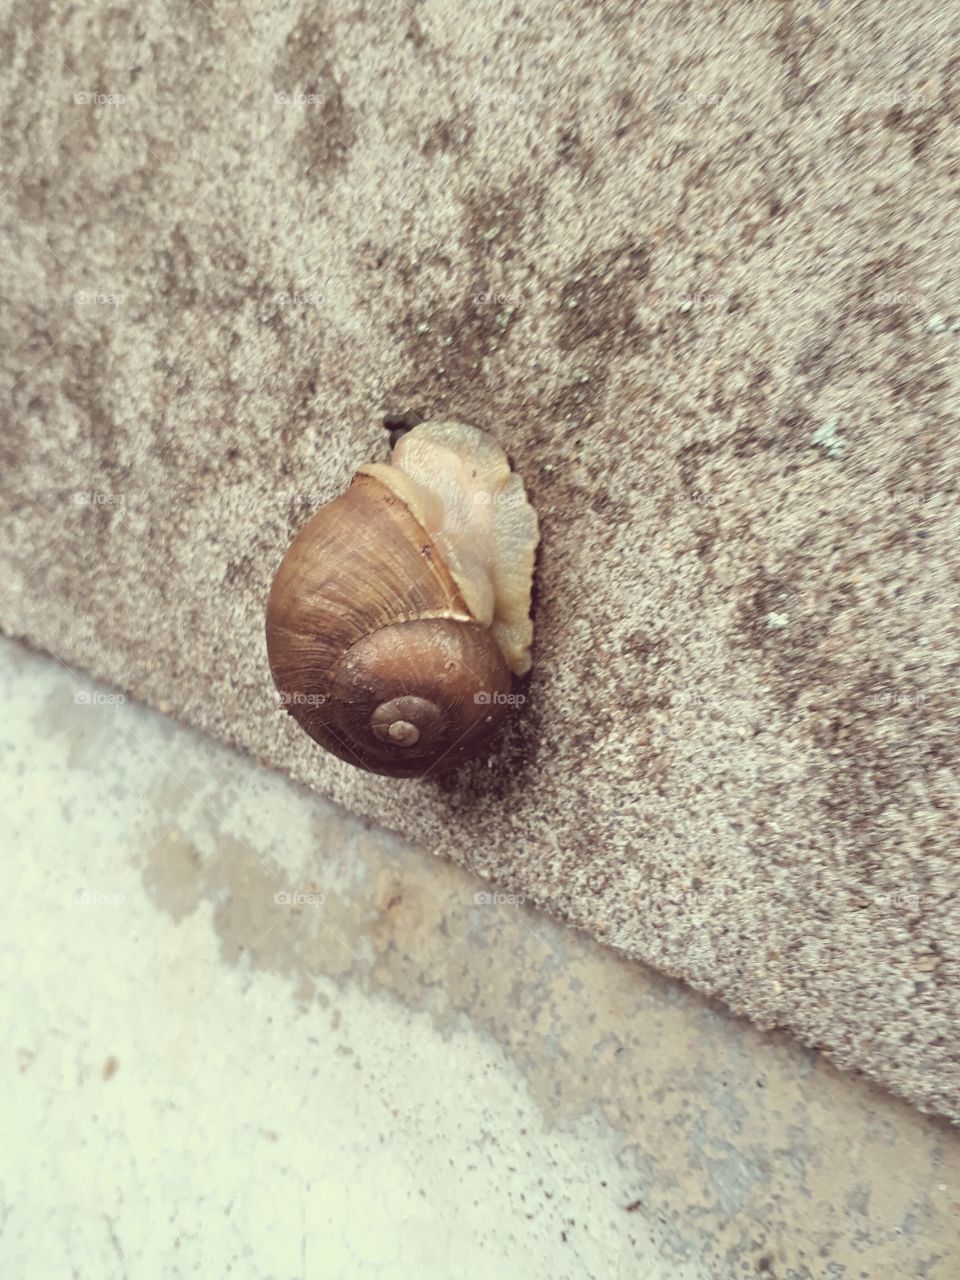 Snail going up the wall